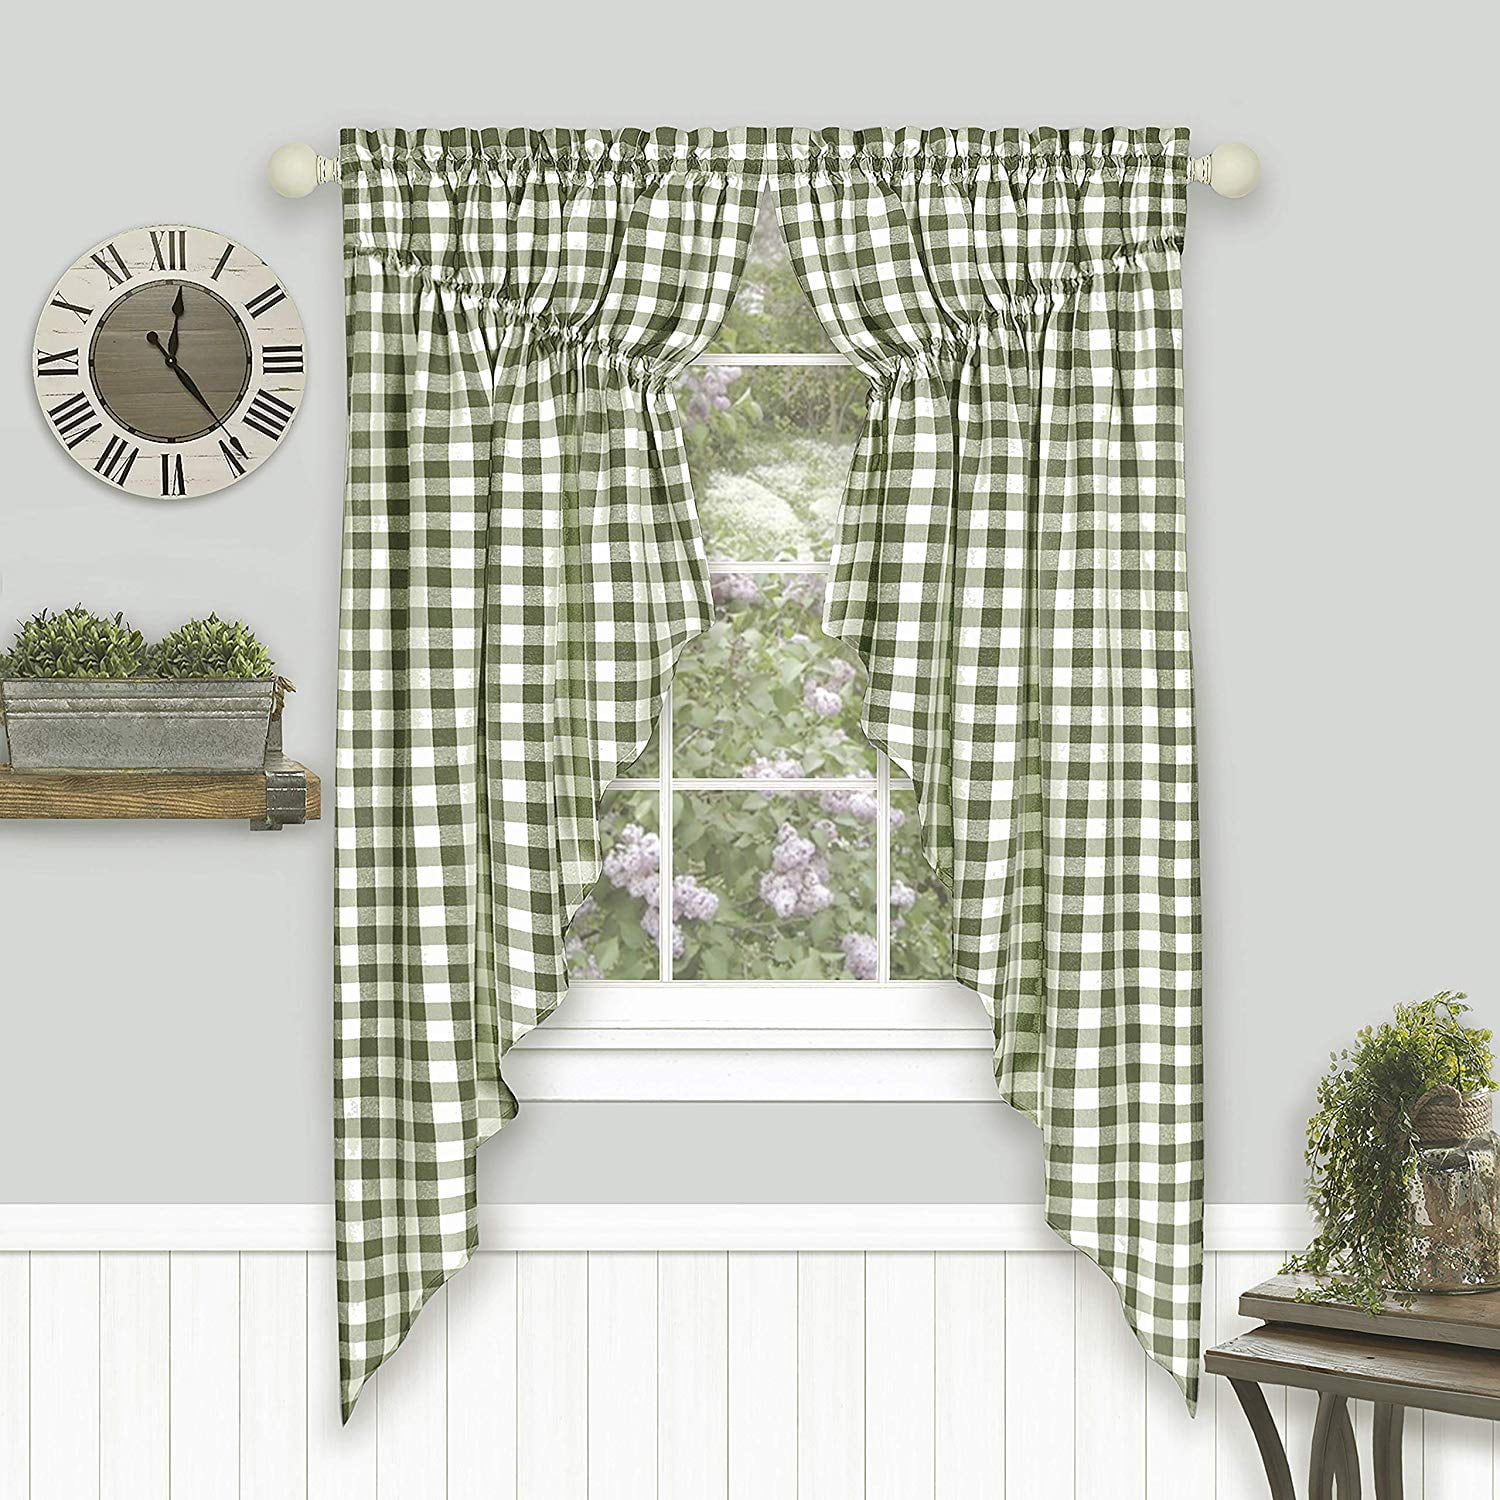 CHOCOLATE & LIME 6 PIECE SWAG & VOILE PANEL CURTAIN SET ~ Many Sizes Available 